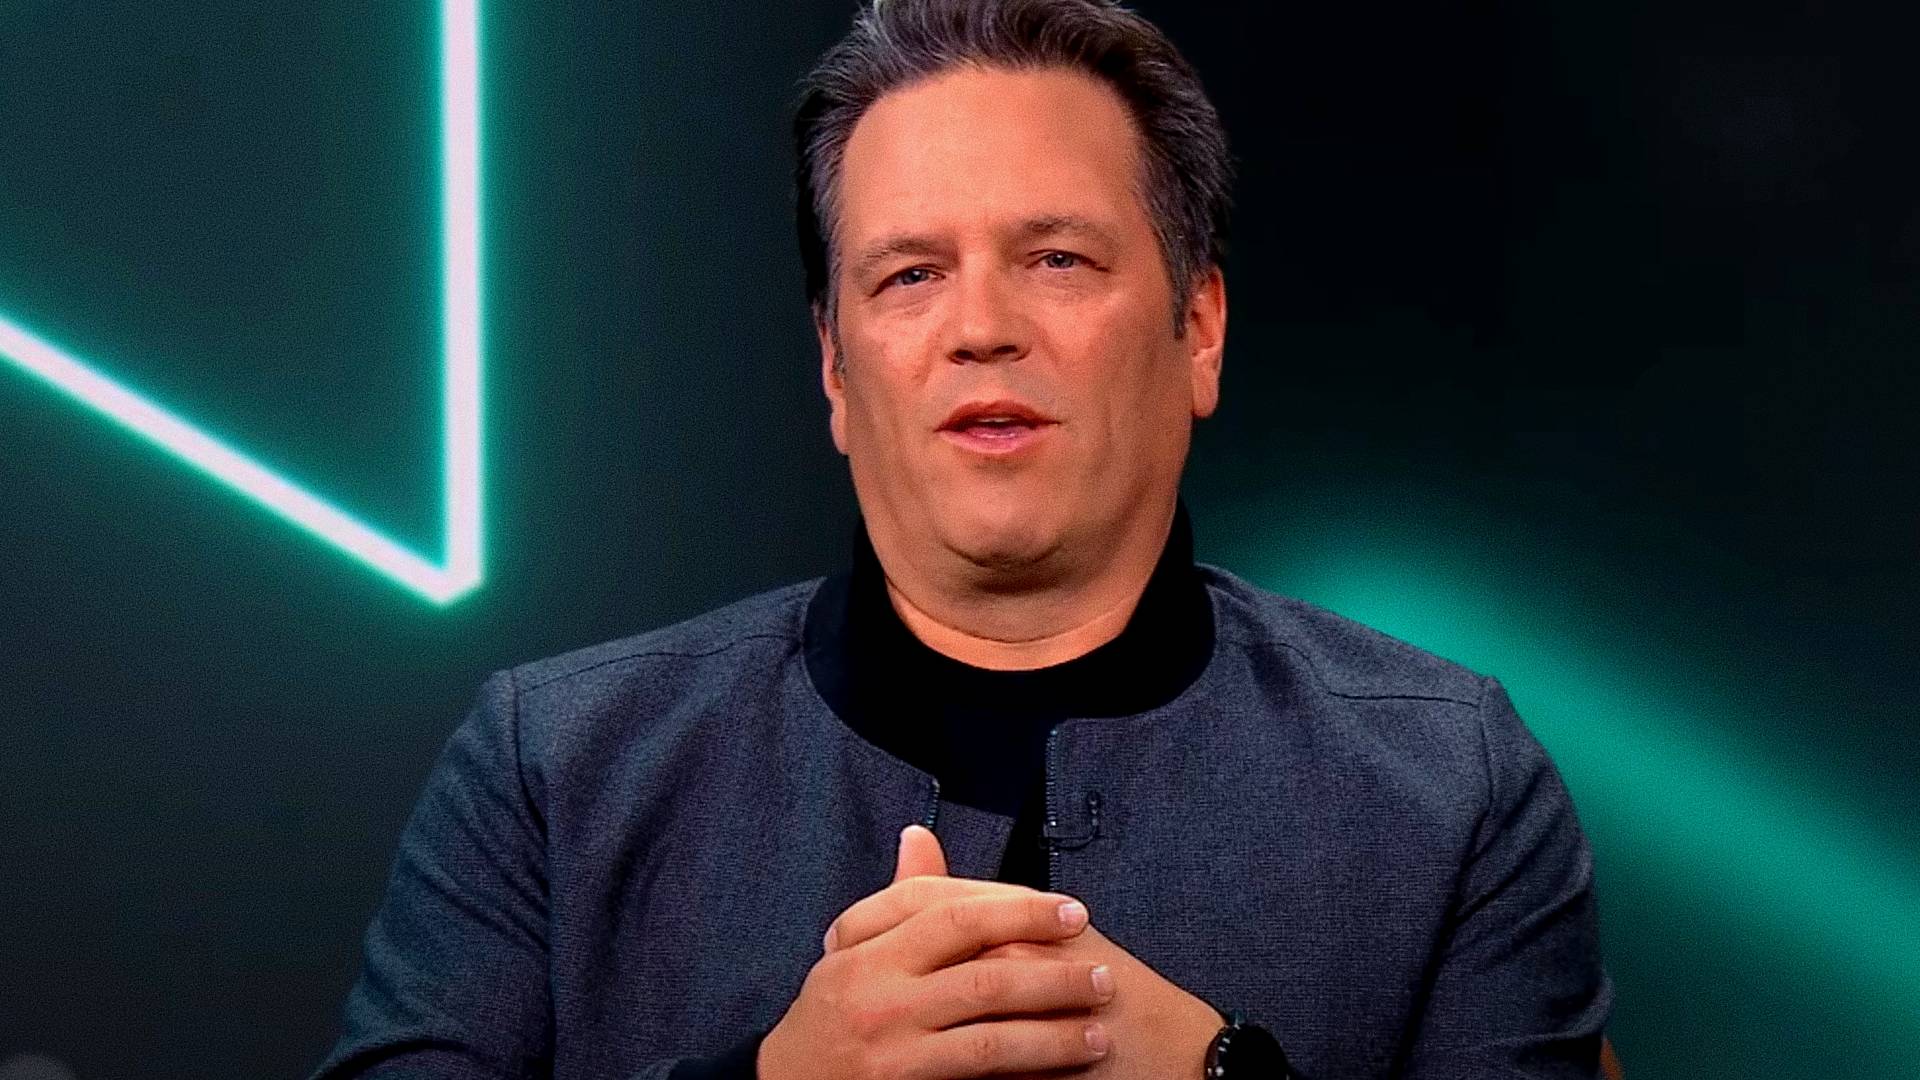 Check your Xbox Year In Review, you may have beaten Phil Spencer